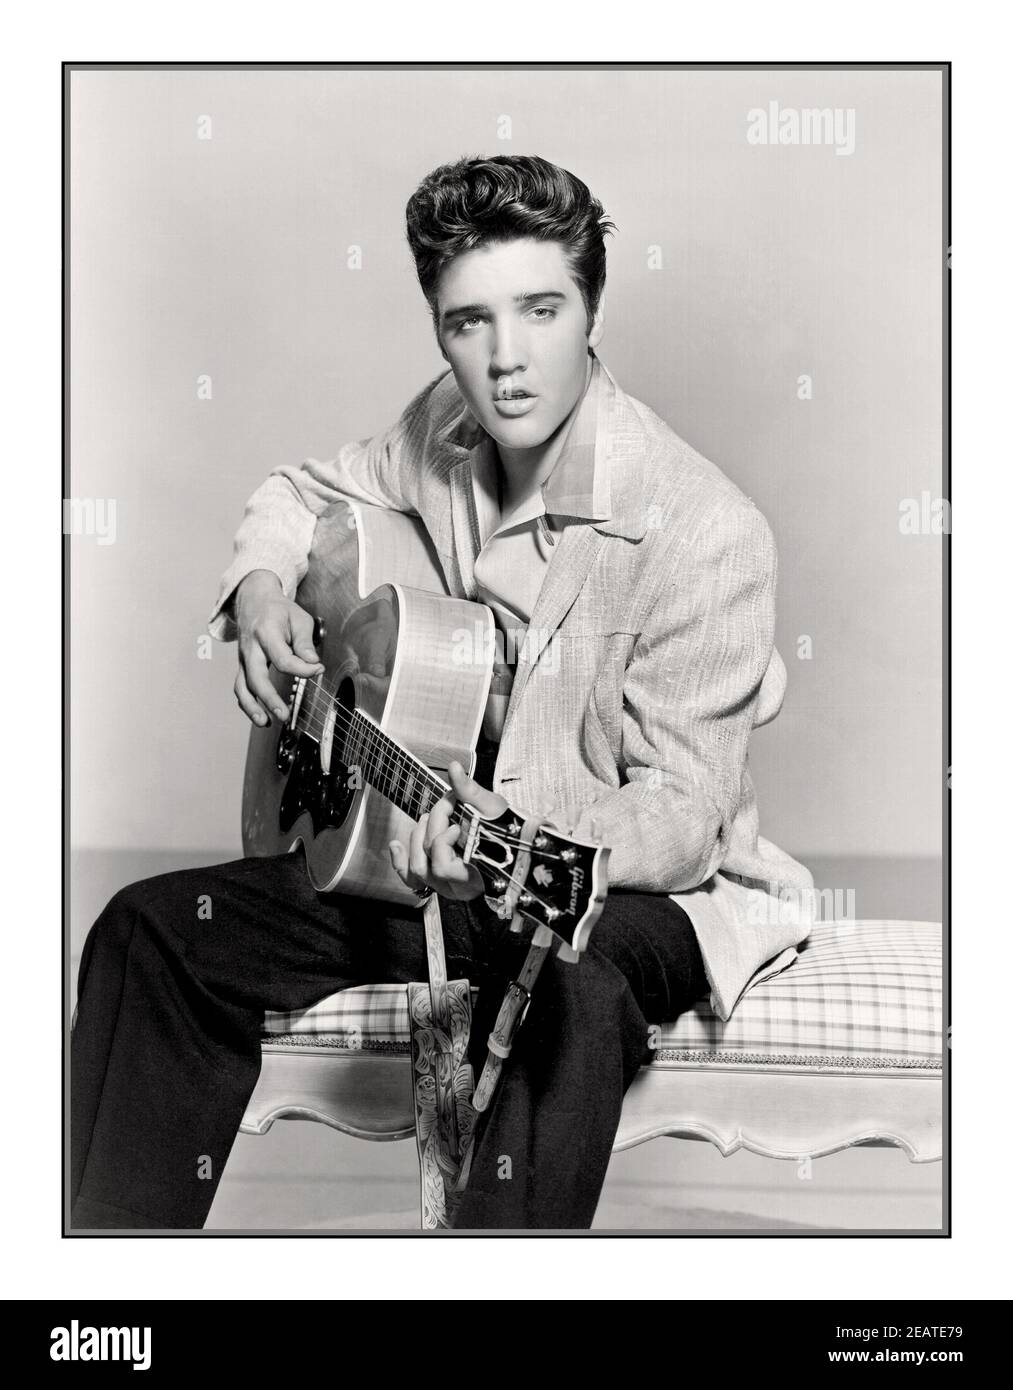 Elvis Presley 1950’s B&W publicity studio still. King of Rock & Roll Holding playing a guitar posing for promotional photo still America USA. Elvis Aaron Presley (January 8, 1935 – August 16, 1977), also known simply as Elvis, was an American singer, musician and actor. He is regarded as one of the most significant cultural icons of the 20th century and is often referred to as the 'King of Rock and Roll' or simply 'The King'. Stock Photo